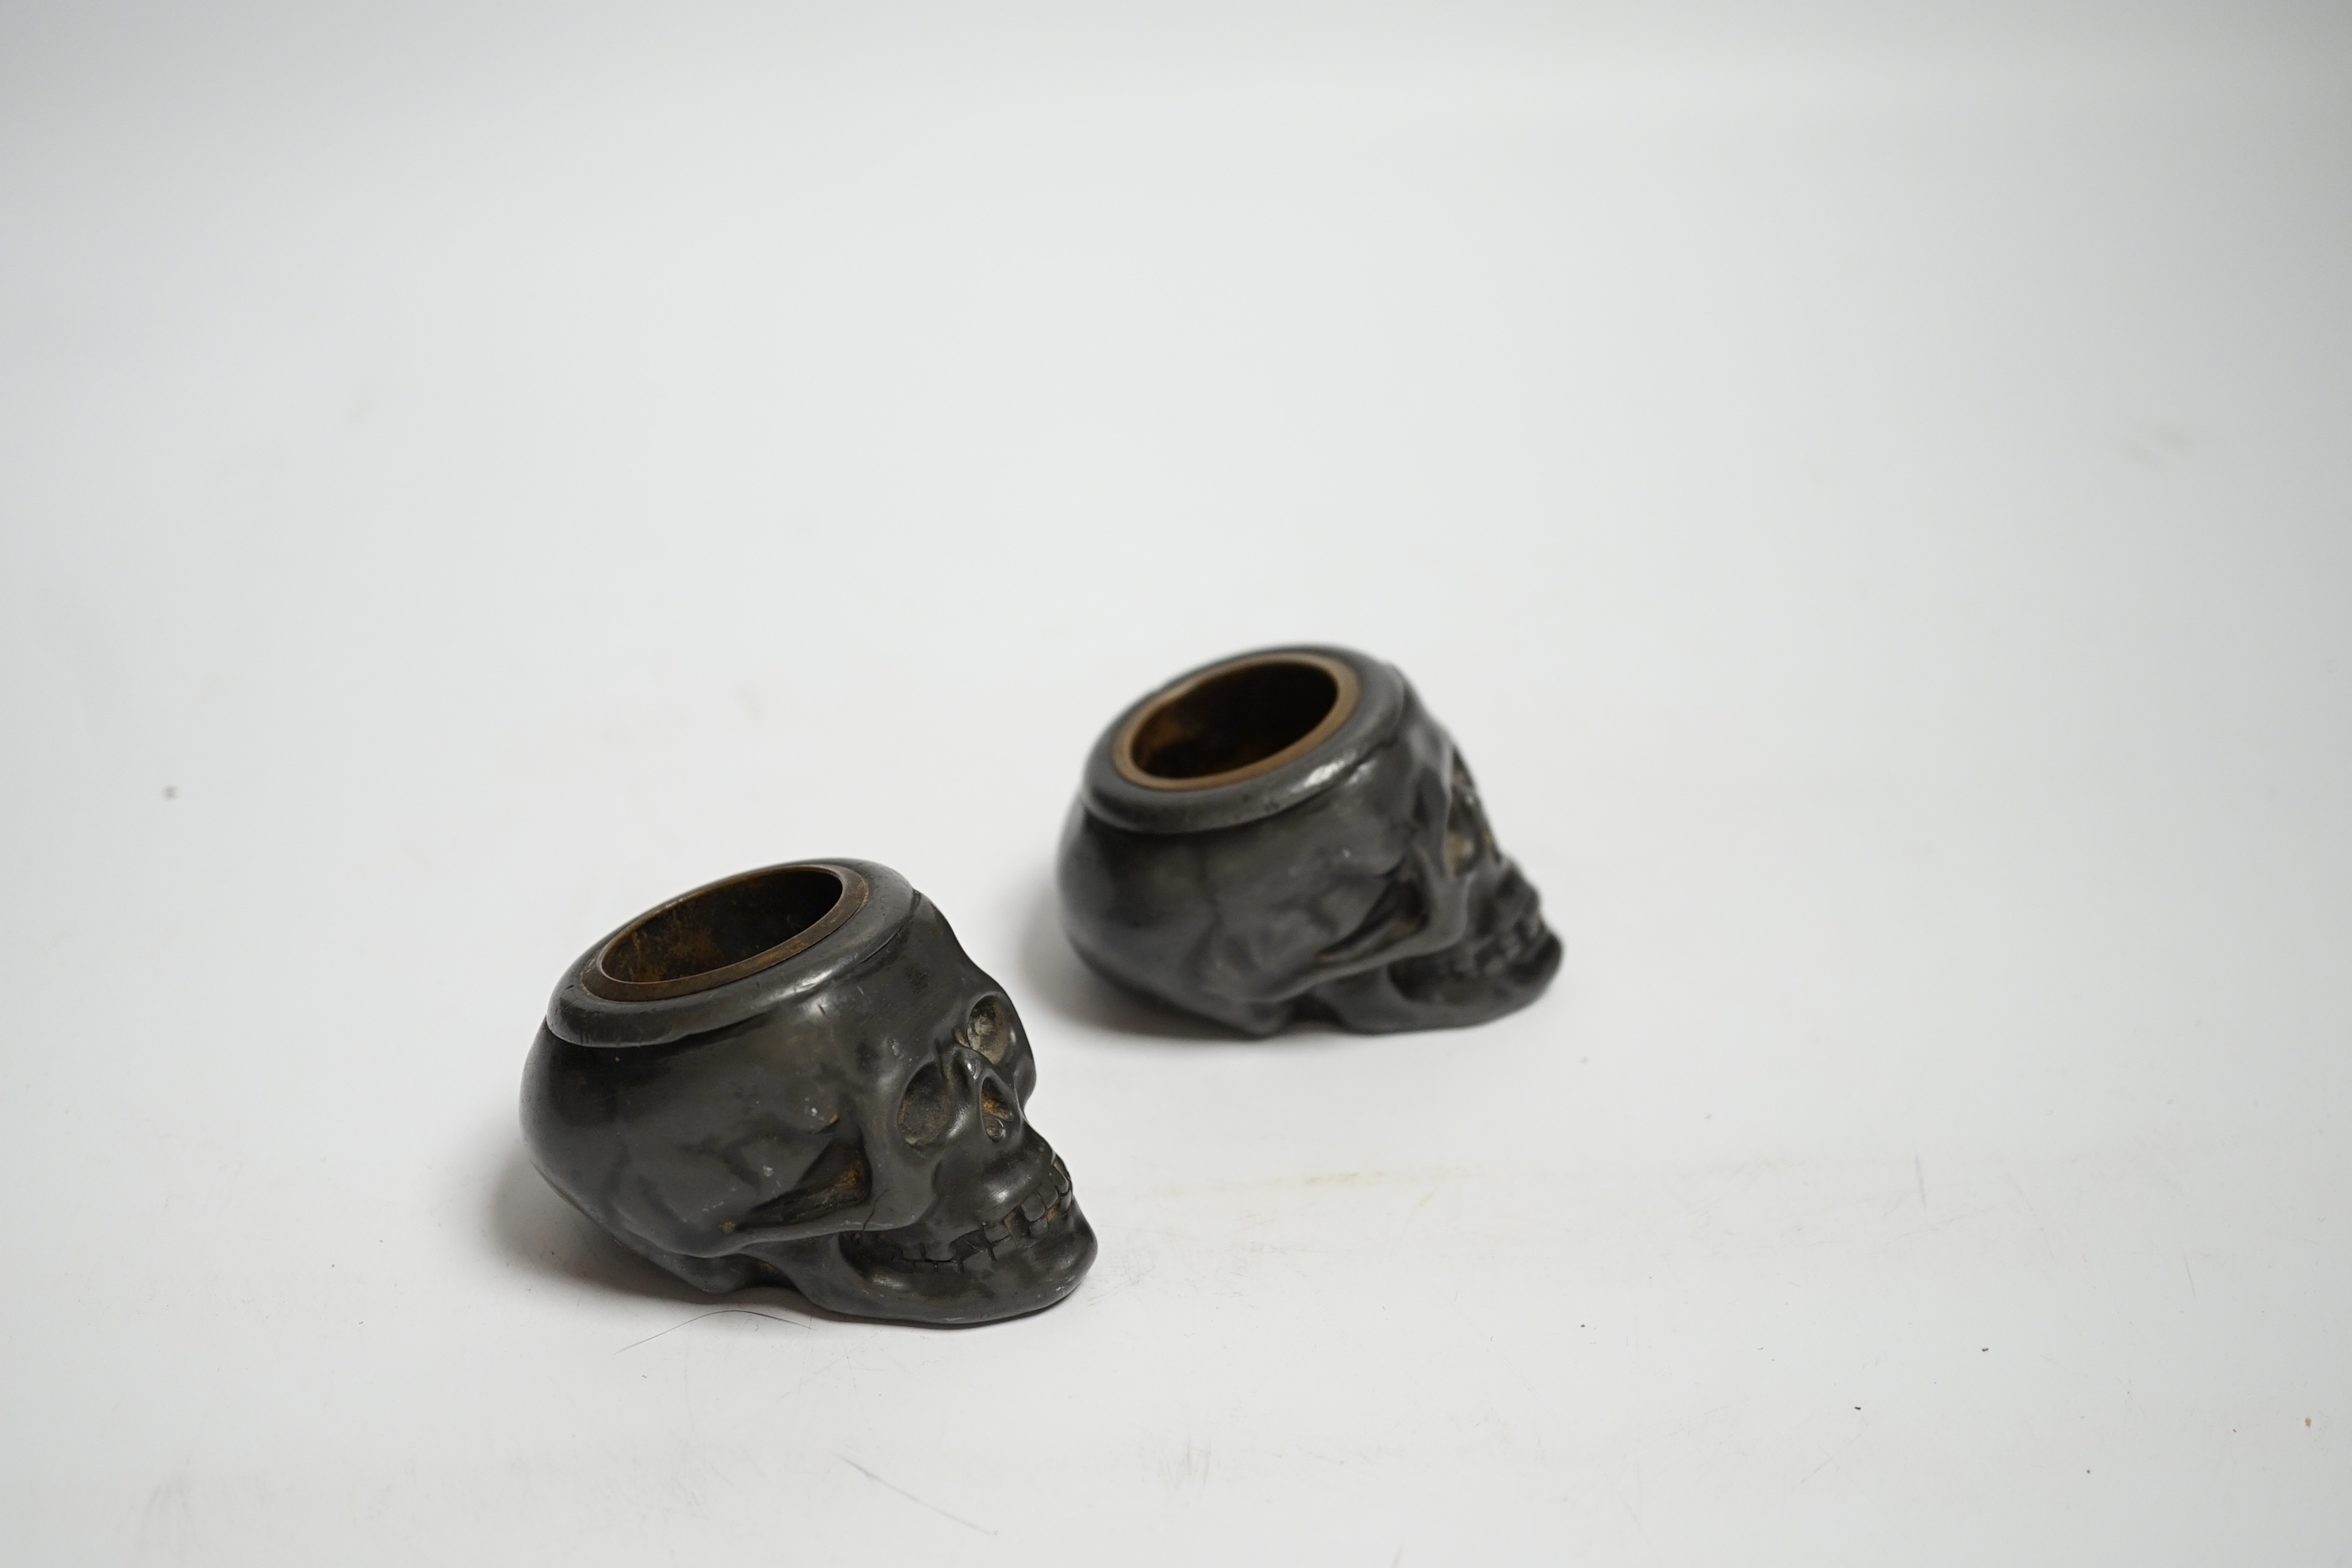 A pair of late 19th century skull shaped pewter match holders, 5cm tall